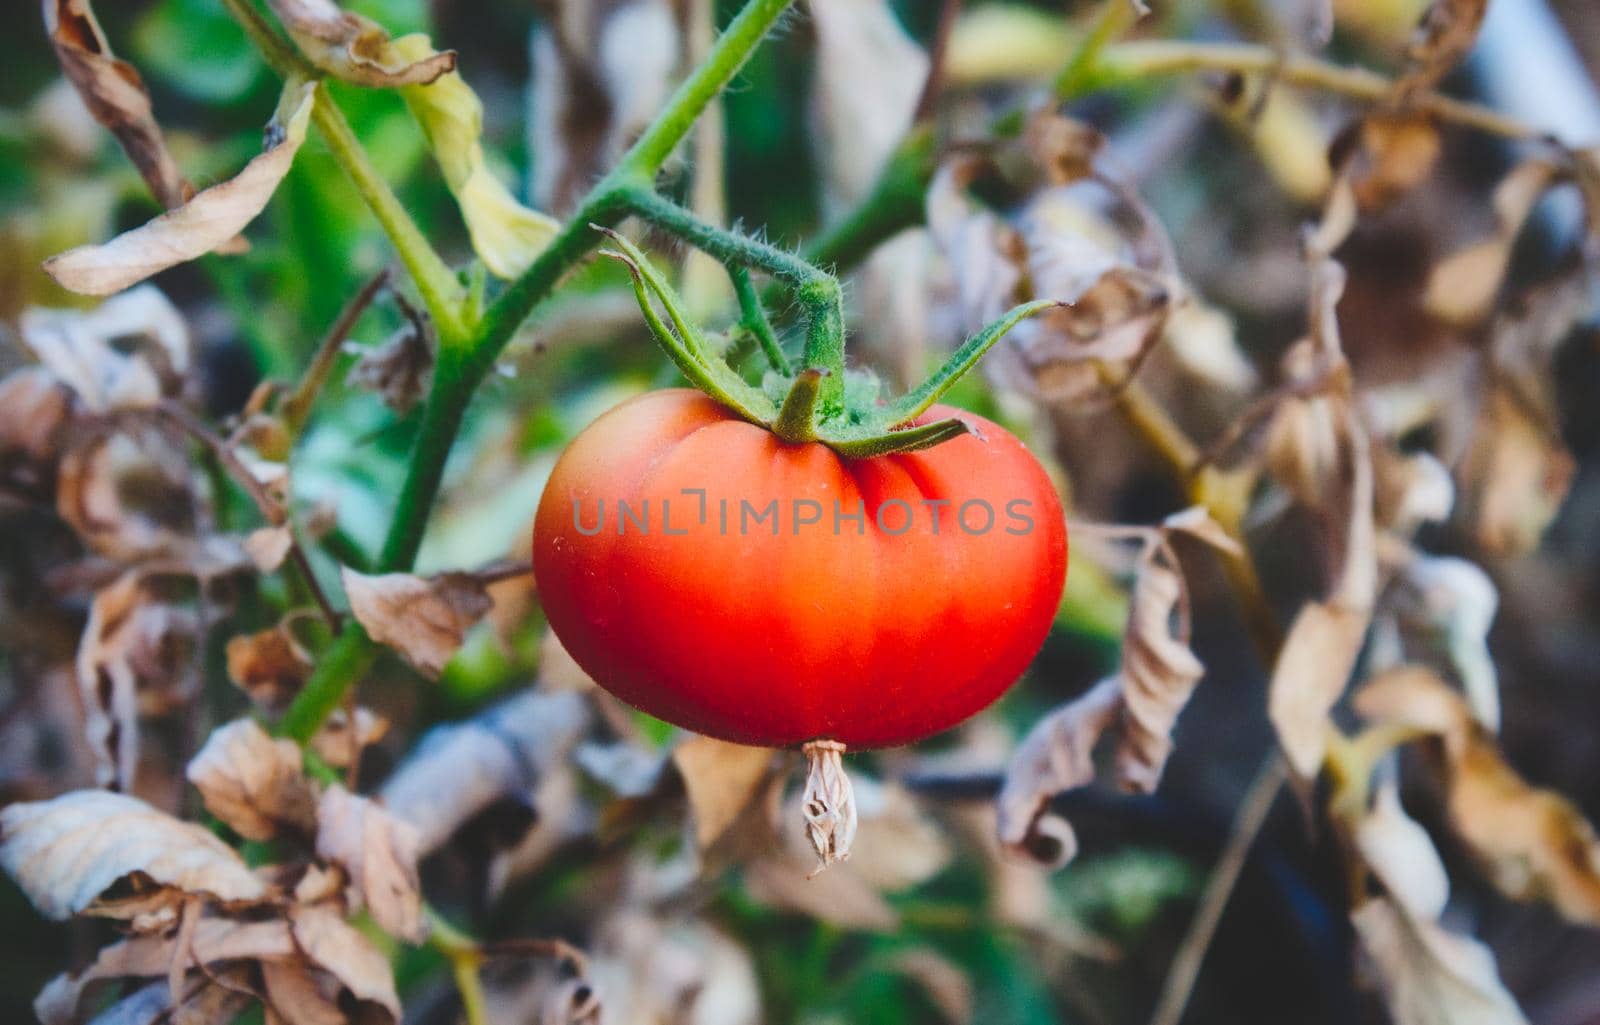 A single, bright red tomato hanging from a green stalk by tennesseewitney